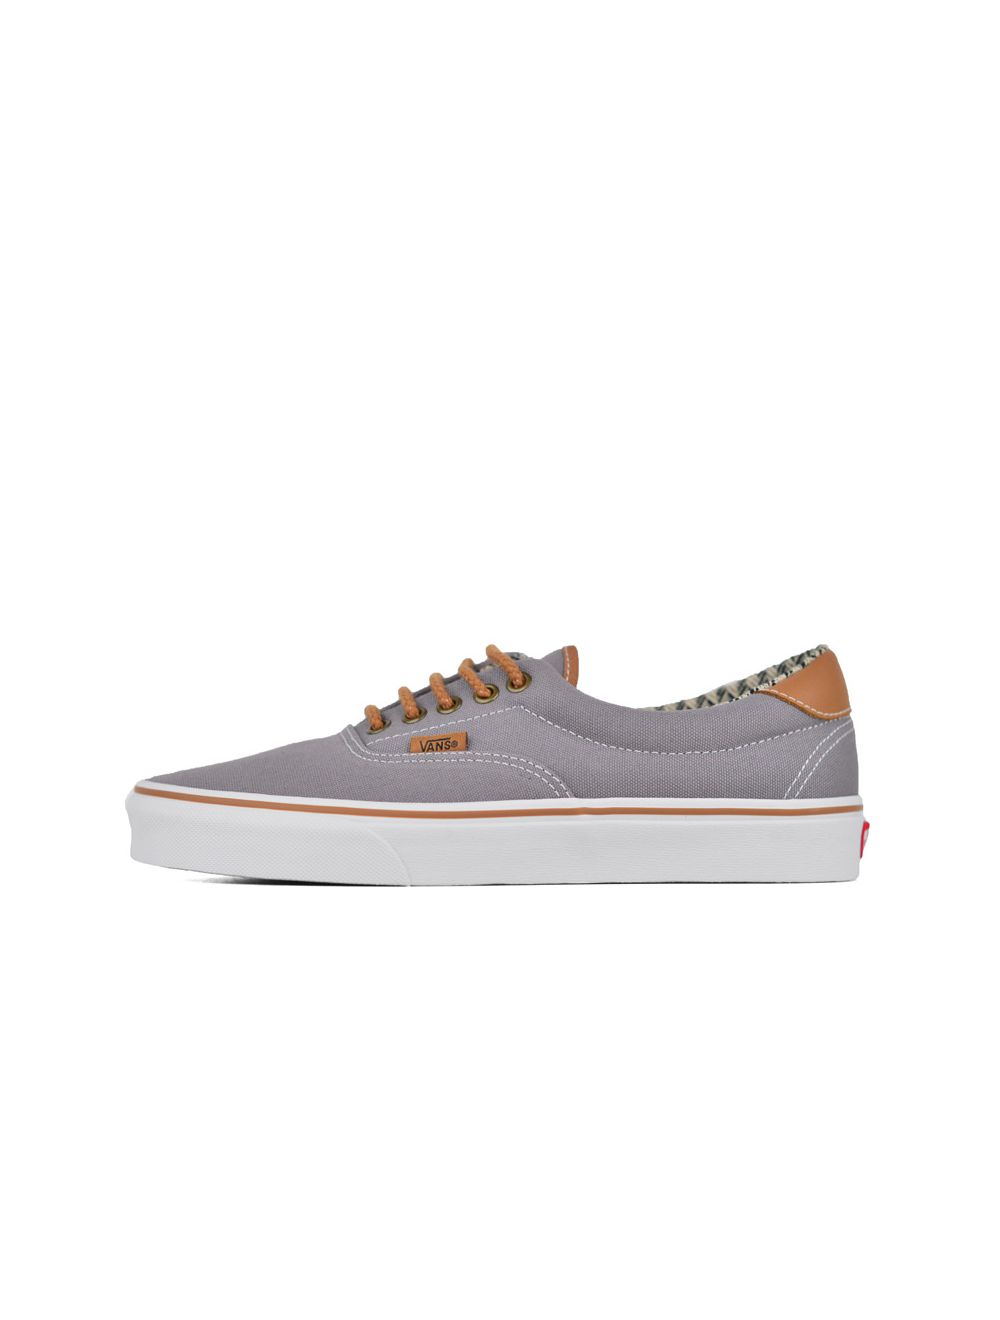 gray vans with brown laces